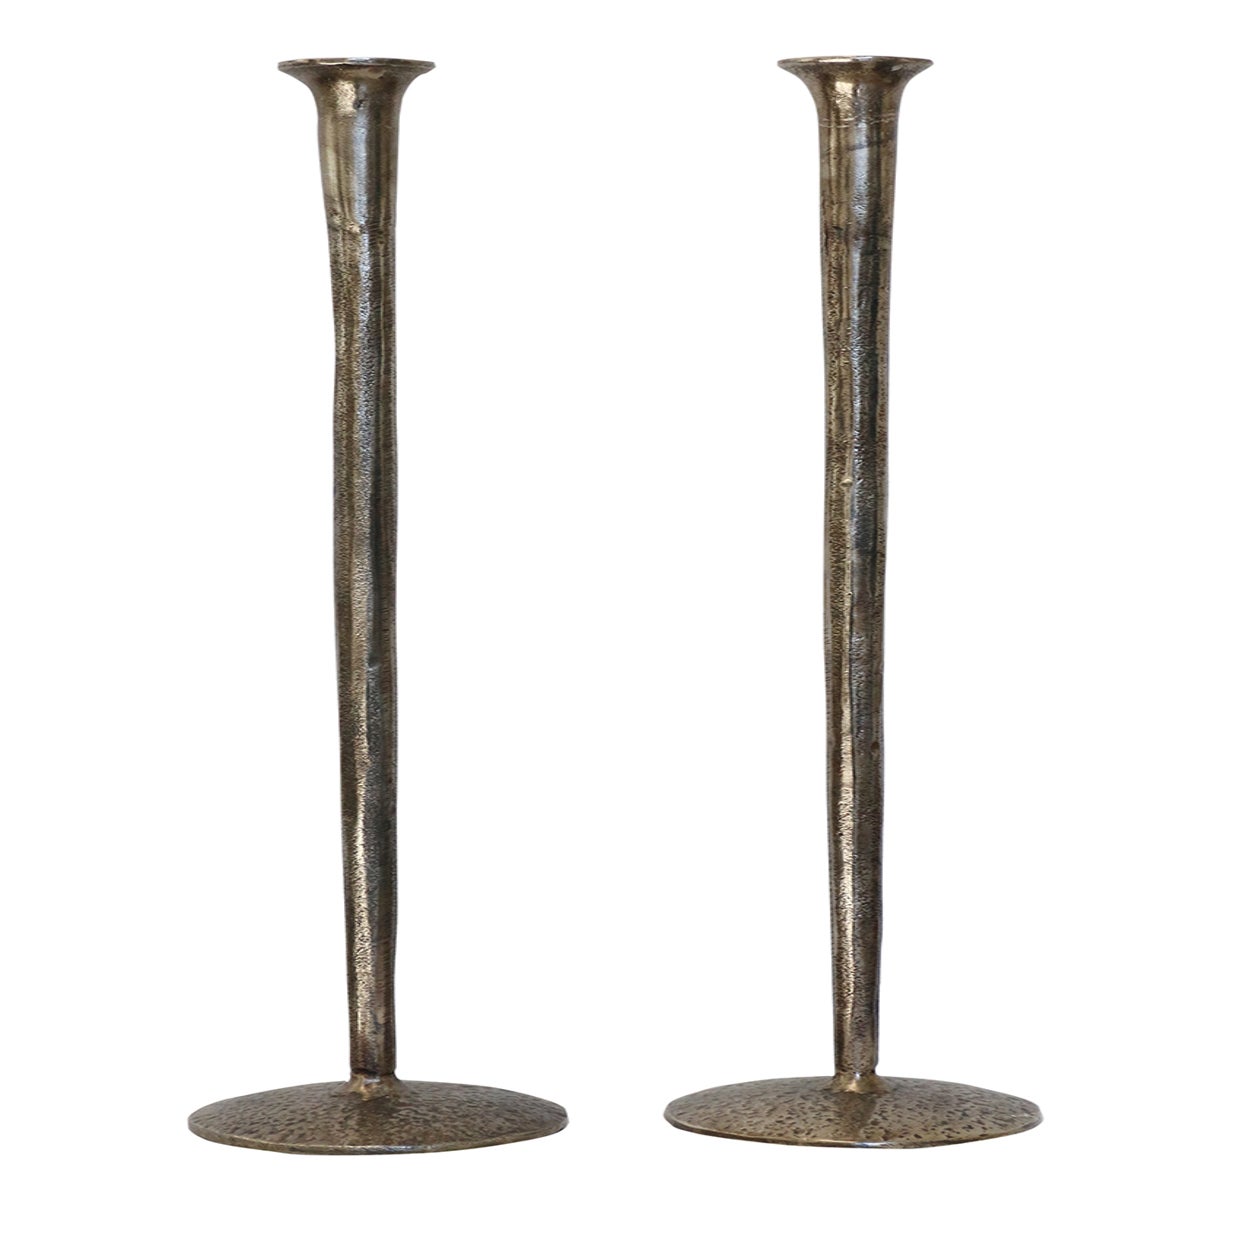 Hammered Candlestick in Aged Pewter Finish with Bronze Accents